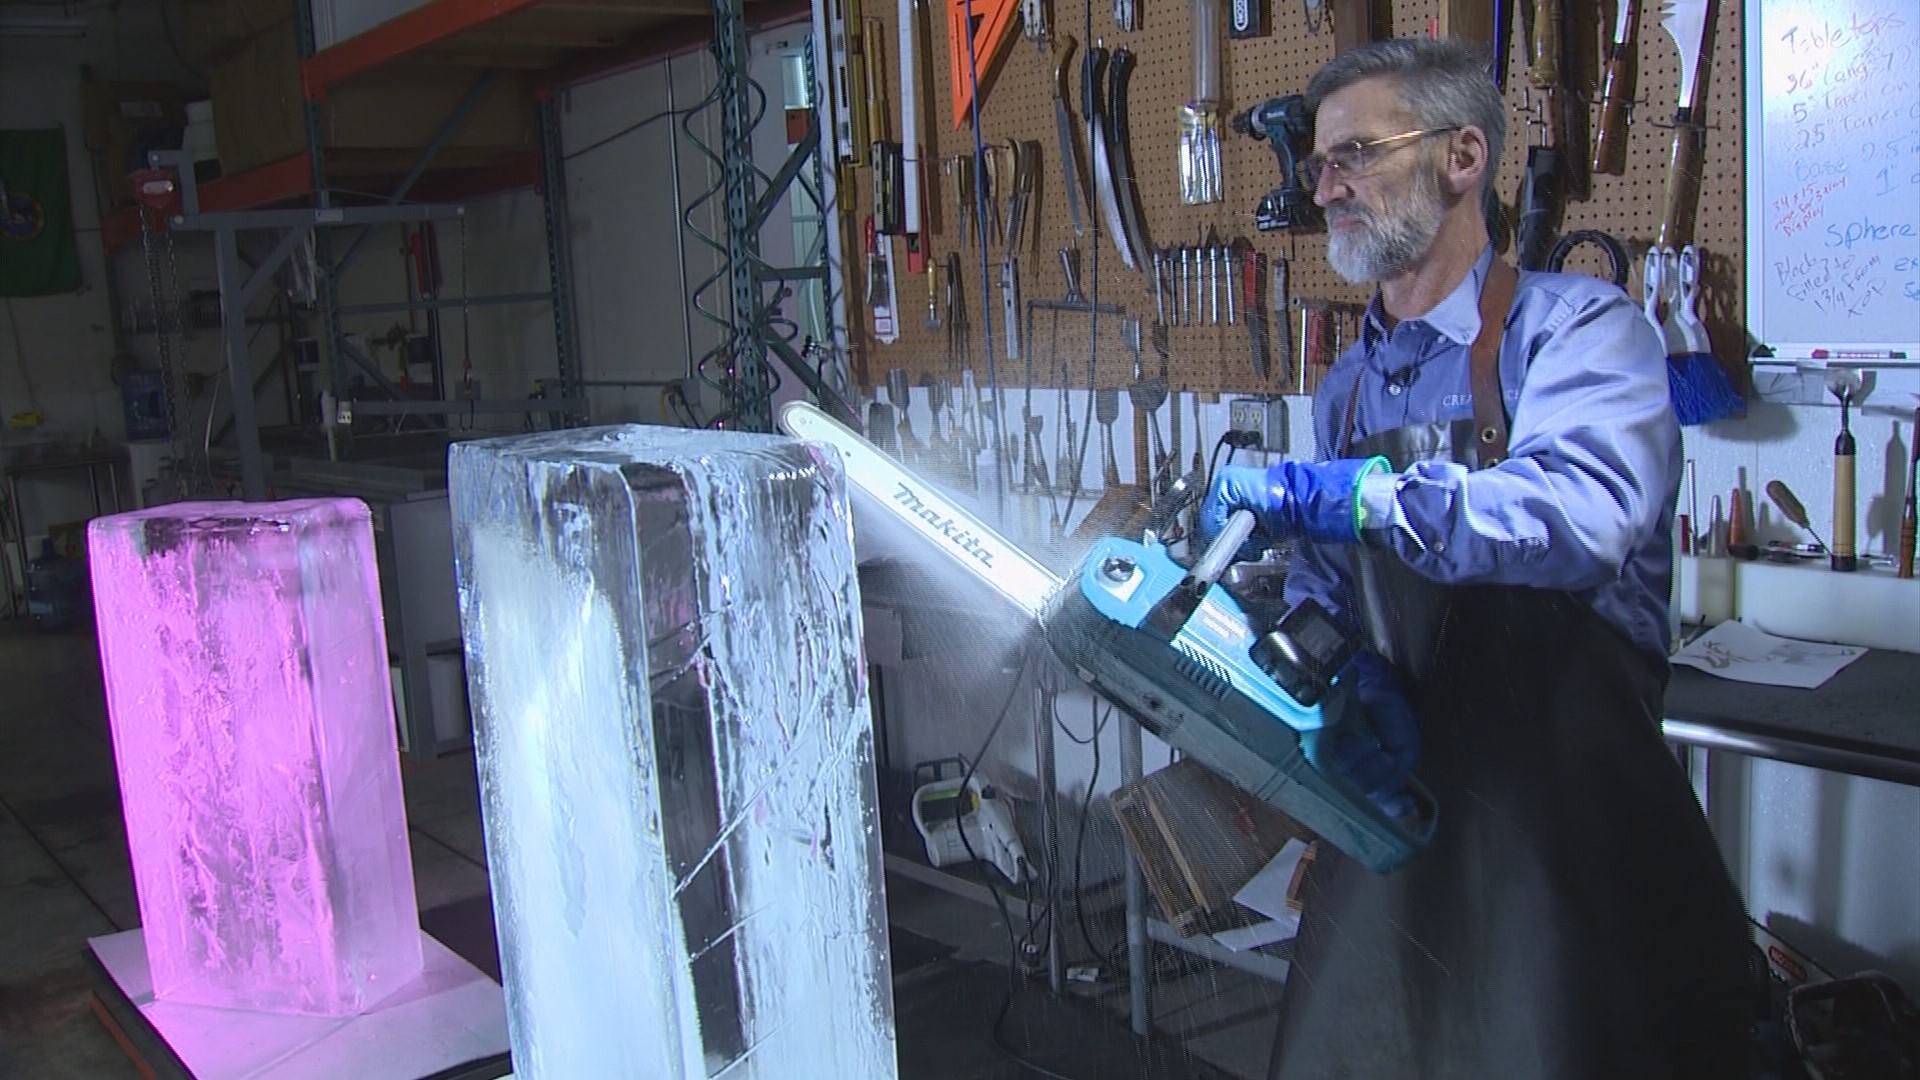 Ice sculptor Steve Cox has been making people smile for over 35 years.